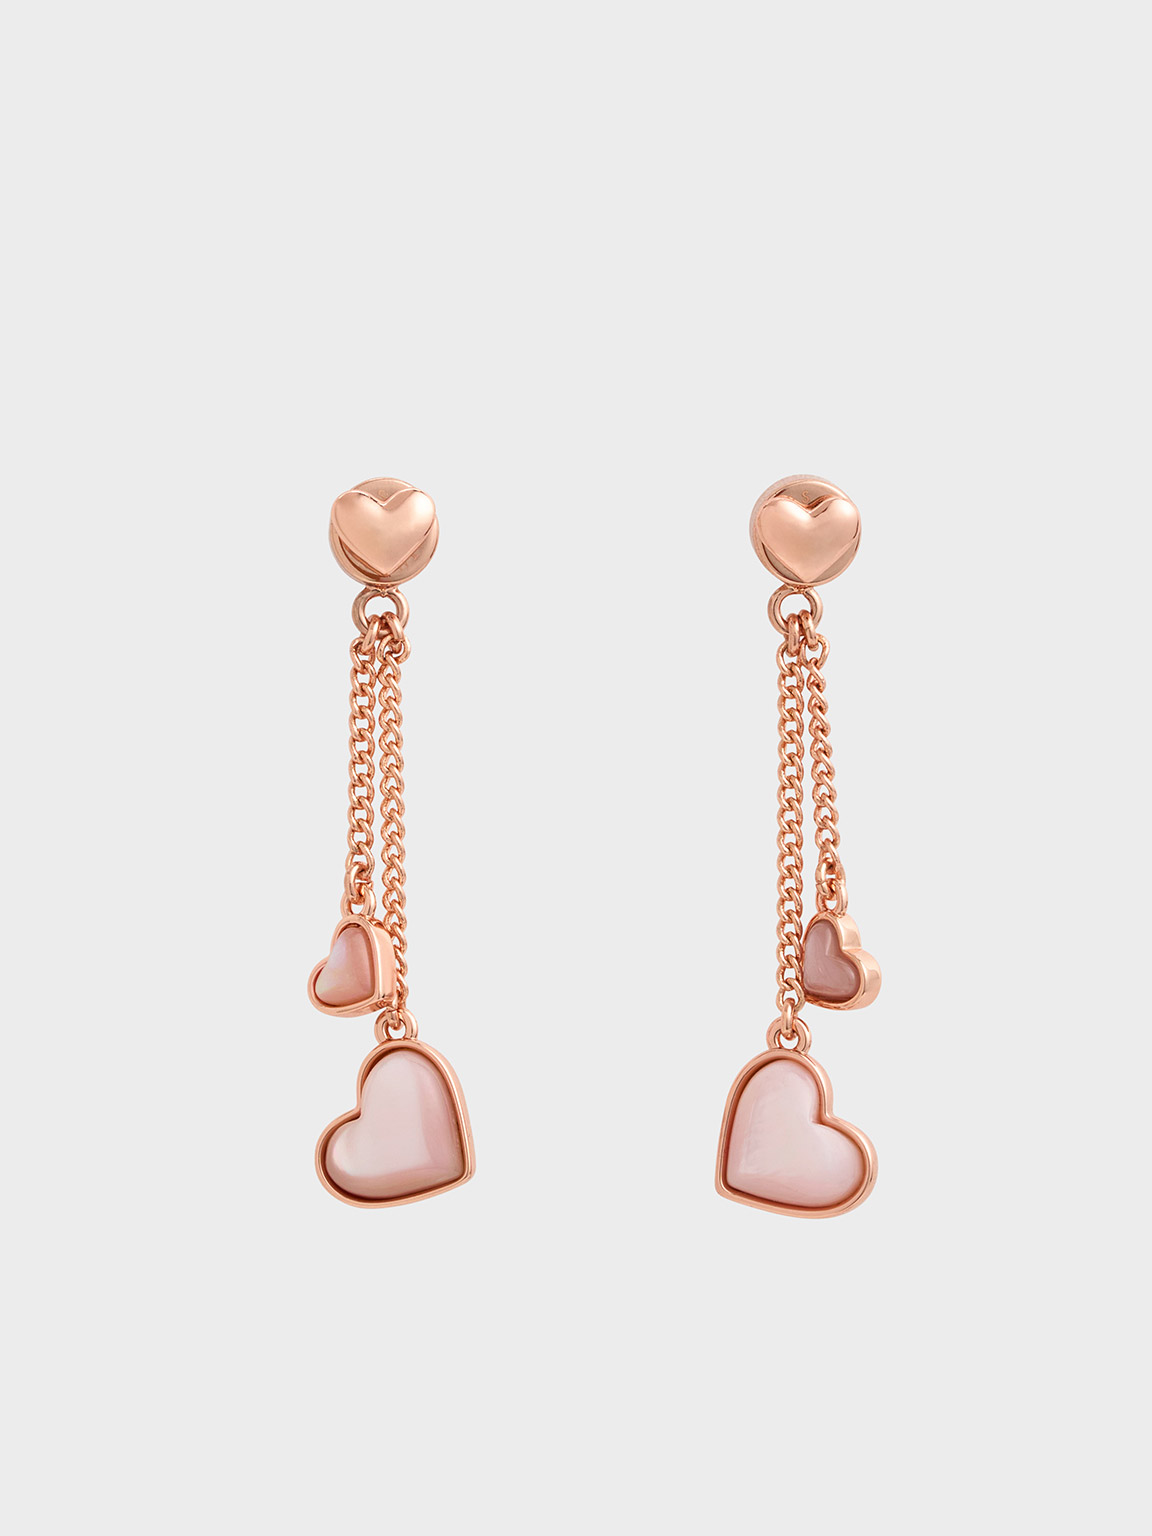 & IE Double KEITH CHARLES - Earrings Heart Gold Rose Drop Annalise Stone